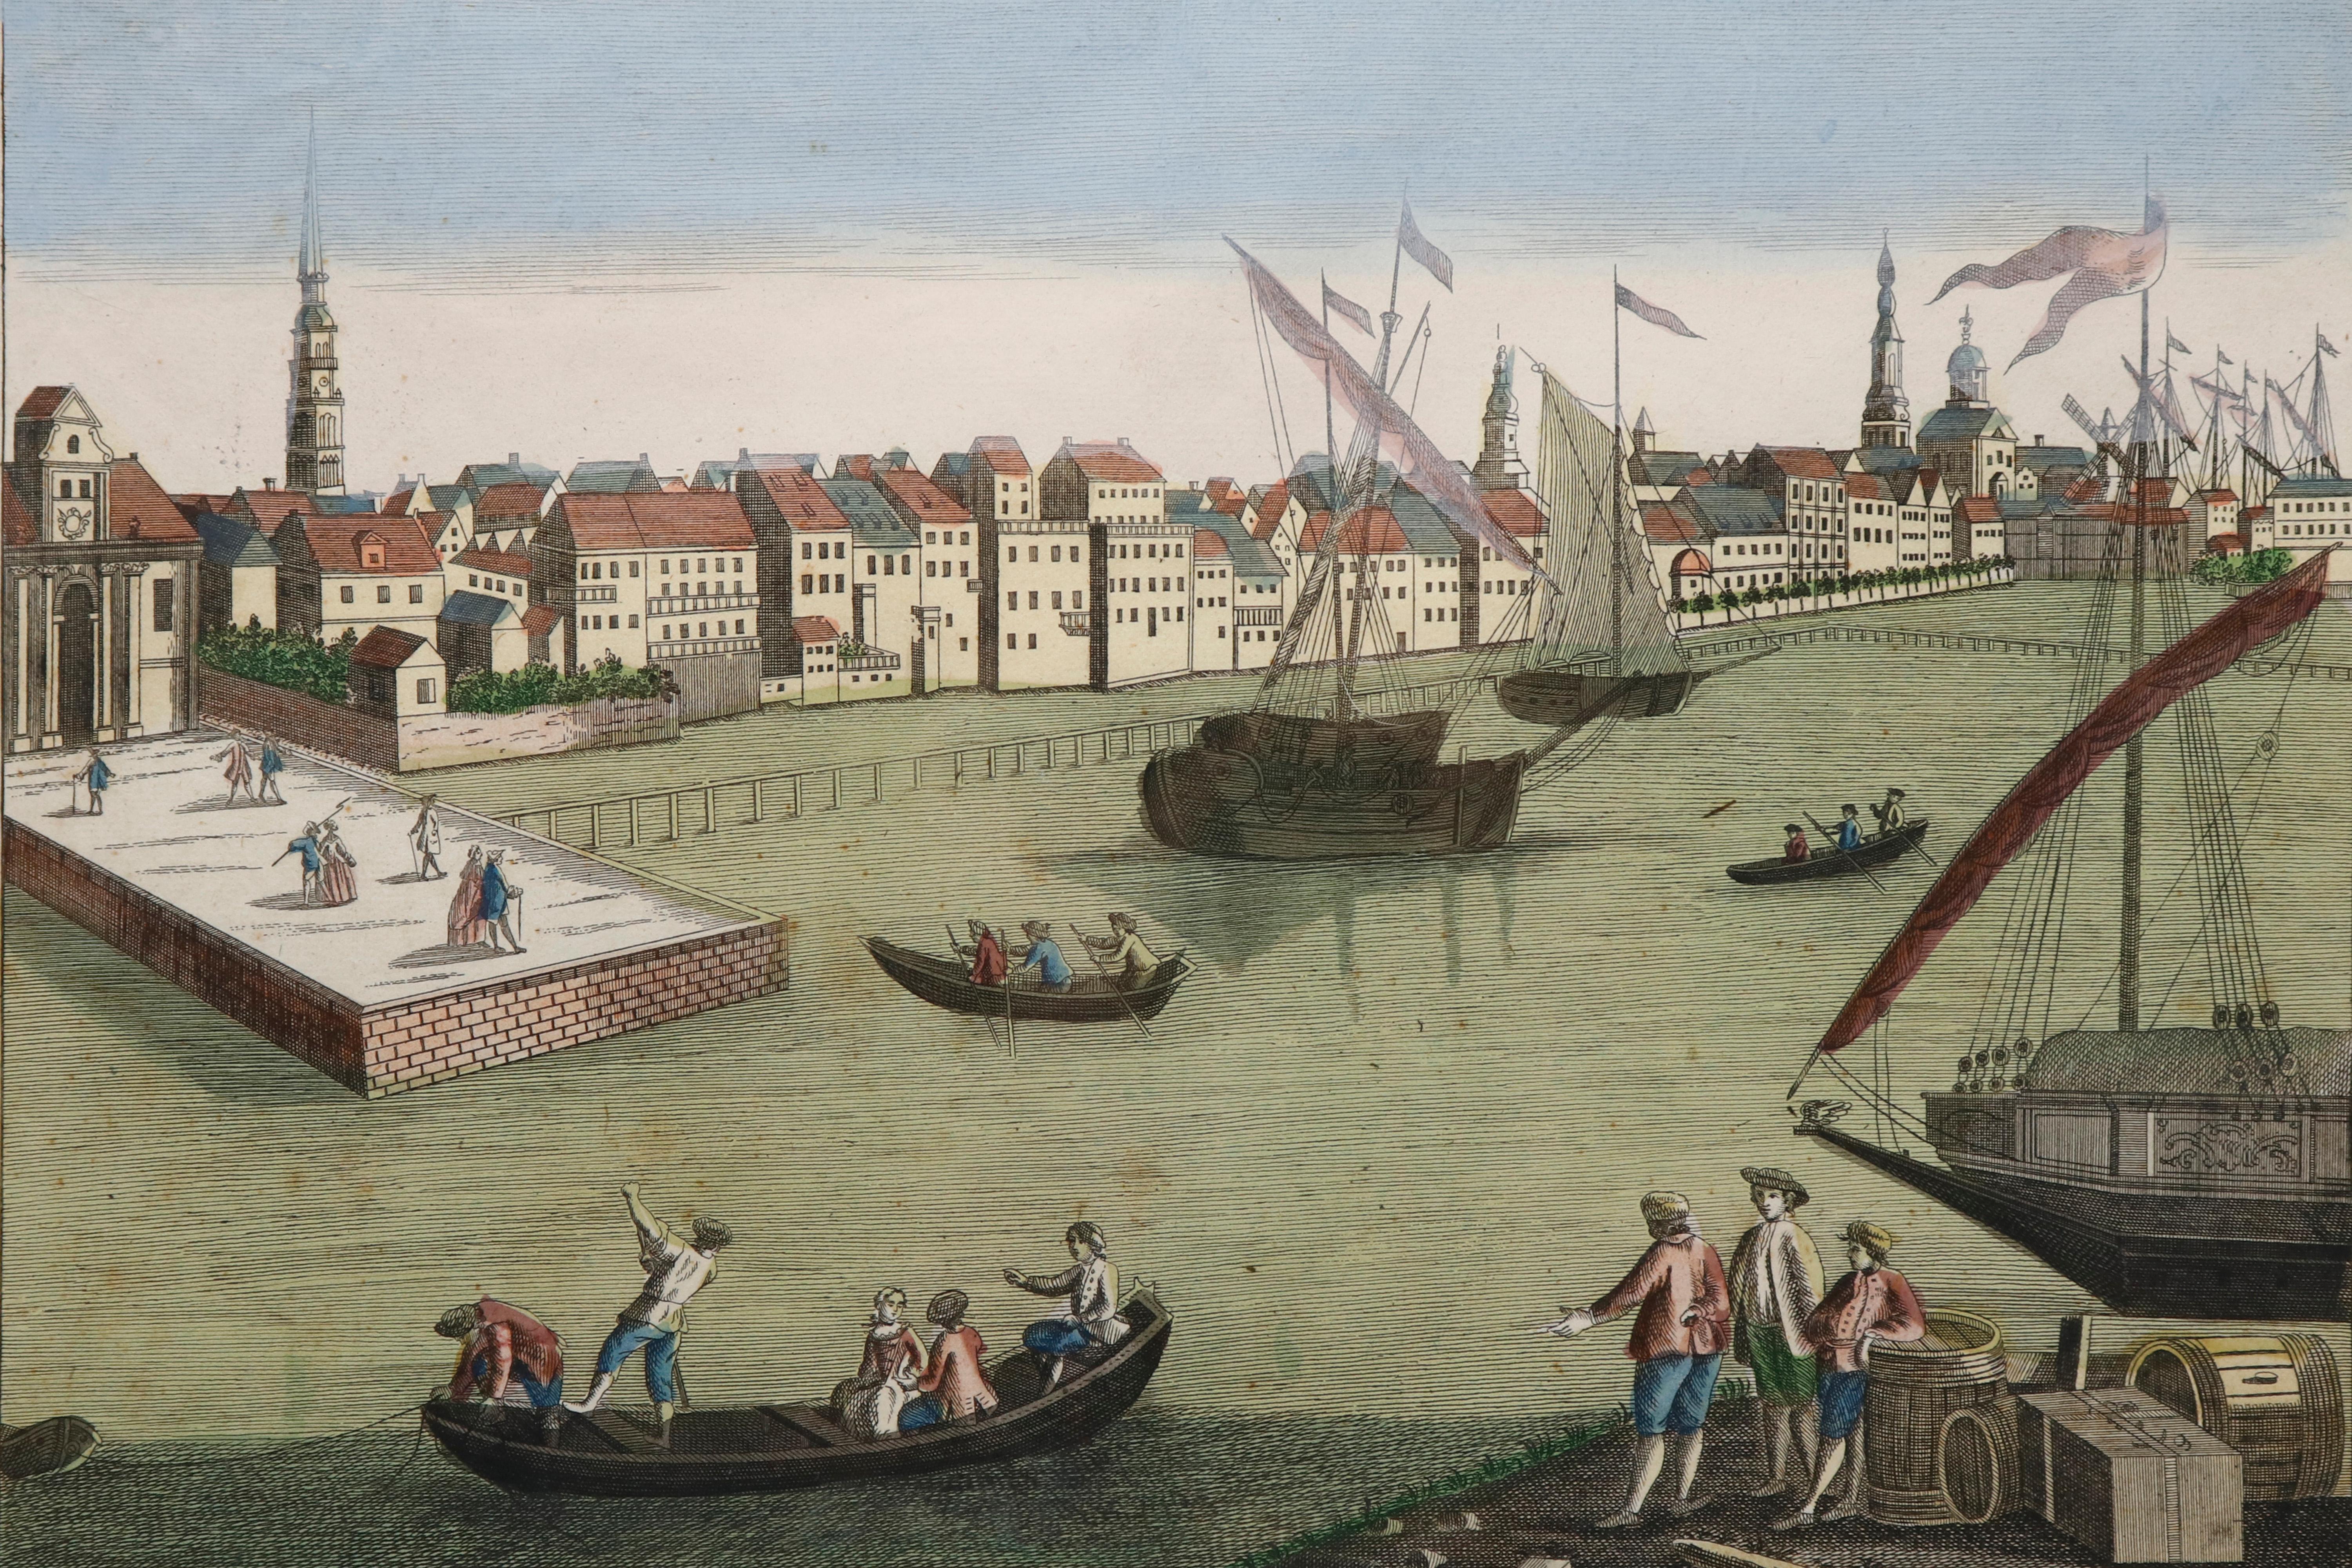 An antique hand colored engraving showing the port of Rotterdam. Inscribed in Latin and Italian “Prospectus portæ veteris roterodamensis / vista de la puerta vieja a roterdam” which translates to ‘View of the old gate to Rotterdam.’